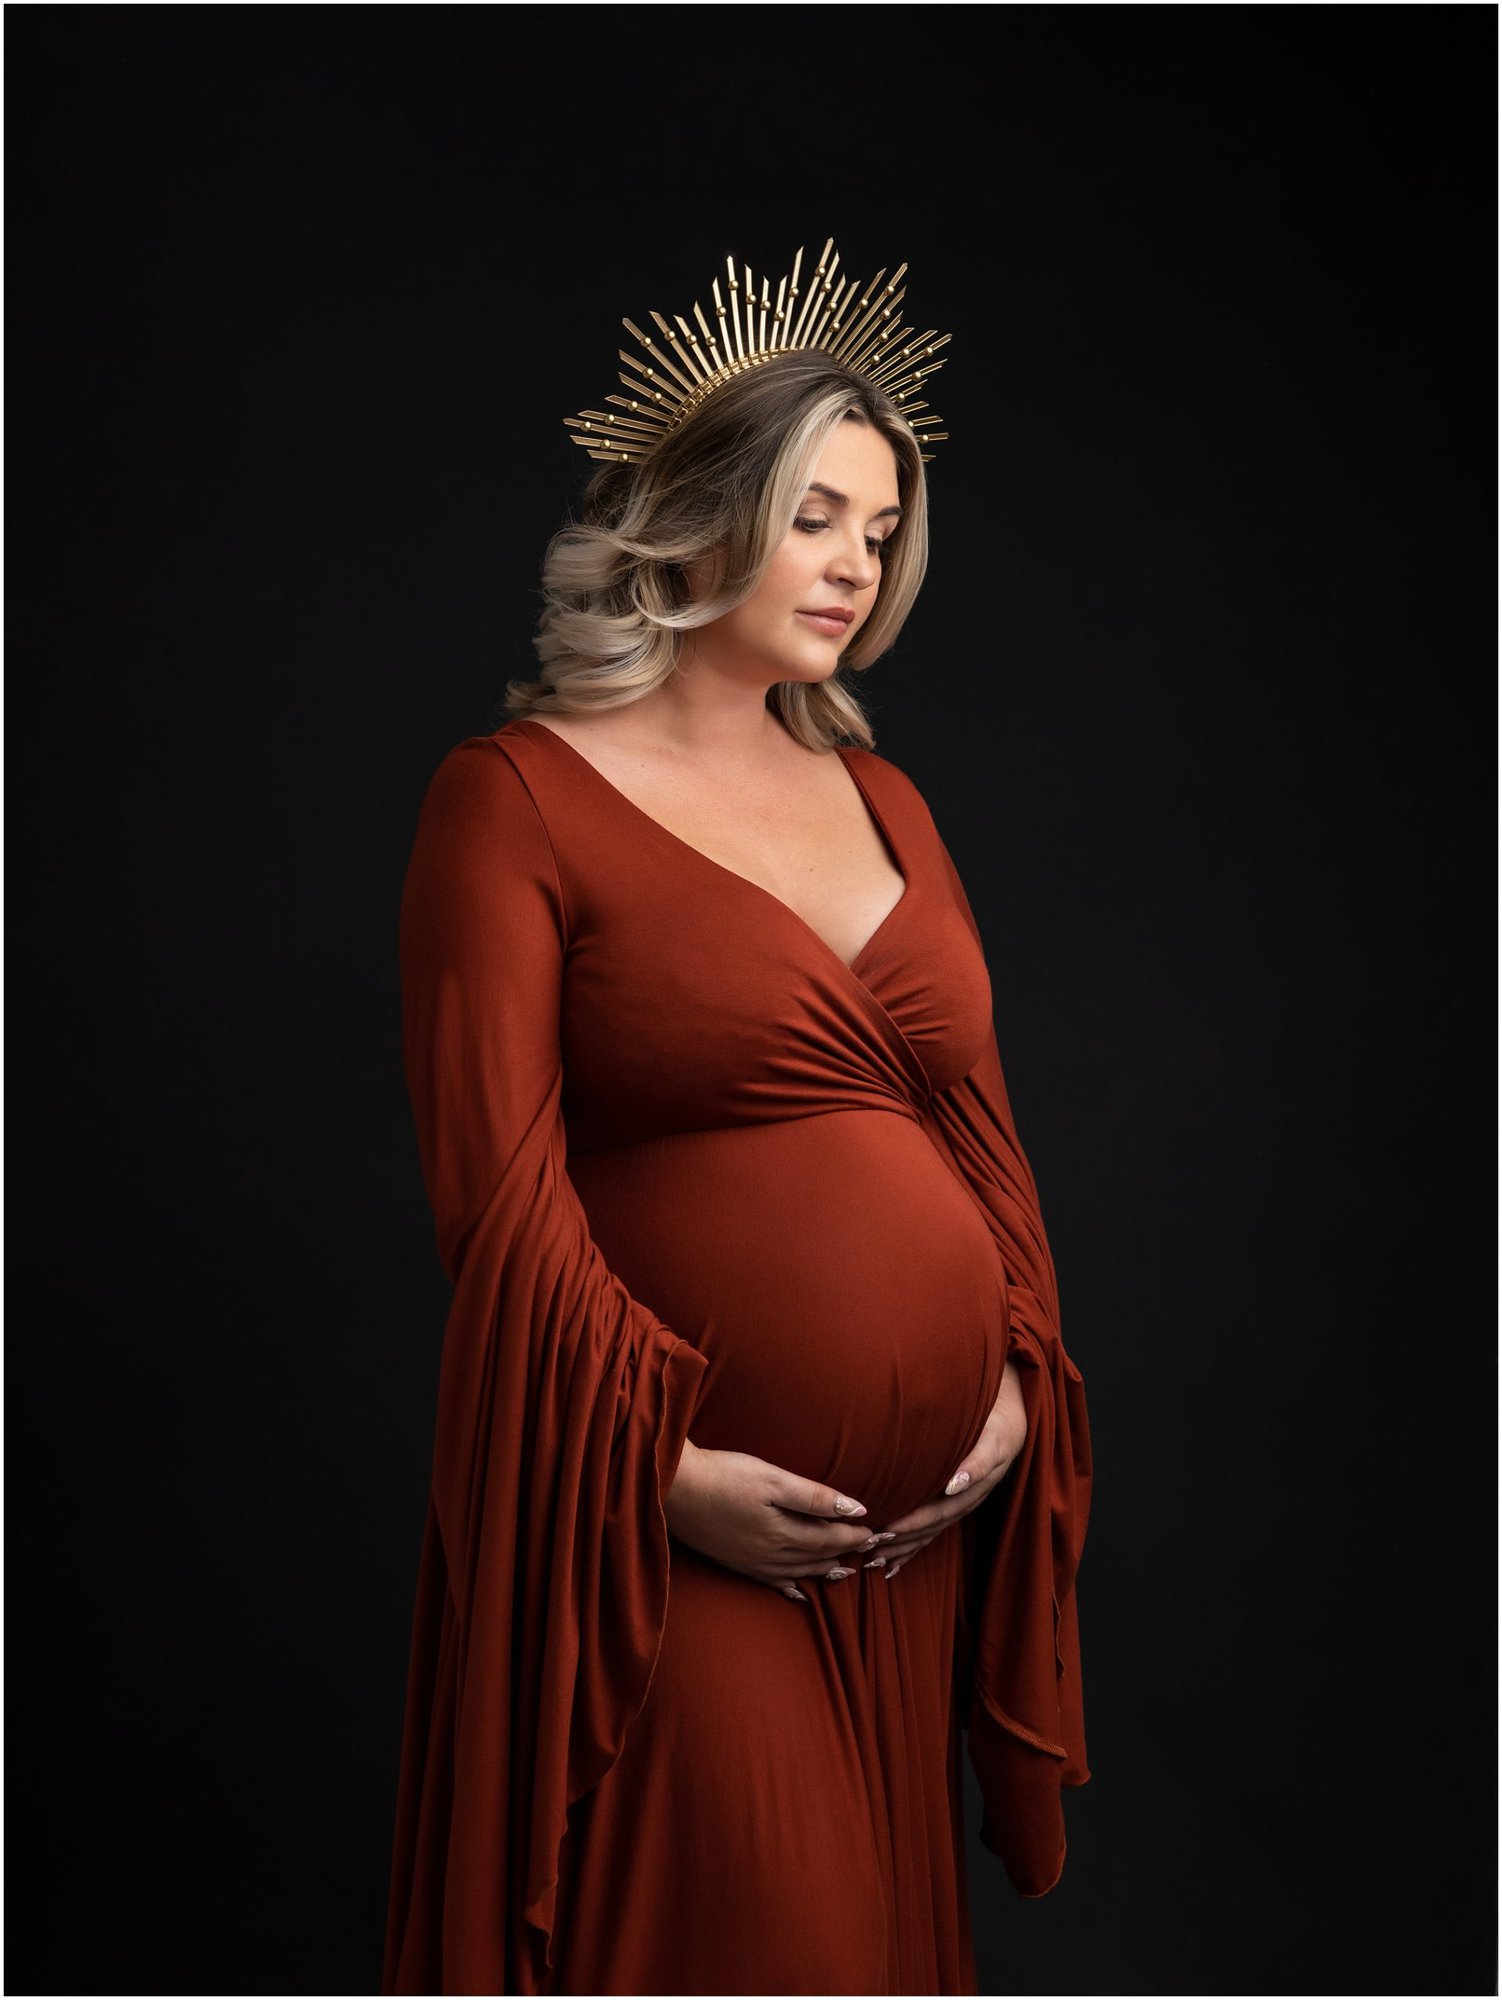 Pregnant lady in rust orange dress and crown poses during maternity photoshoot with Suffolk Photographer Alison McKenny